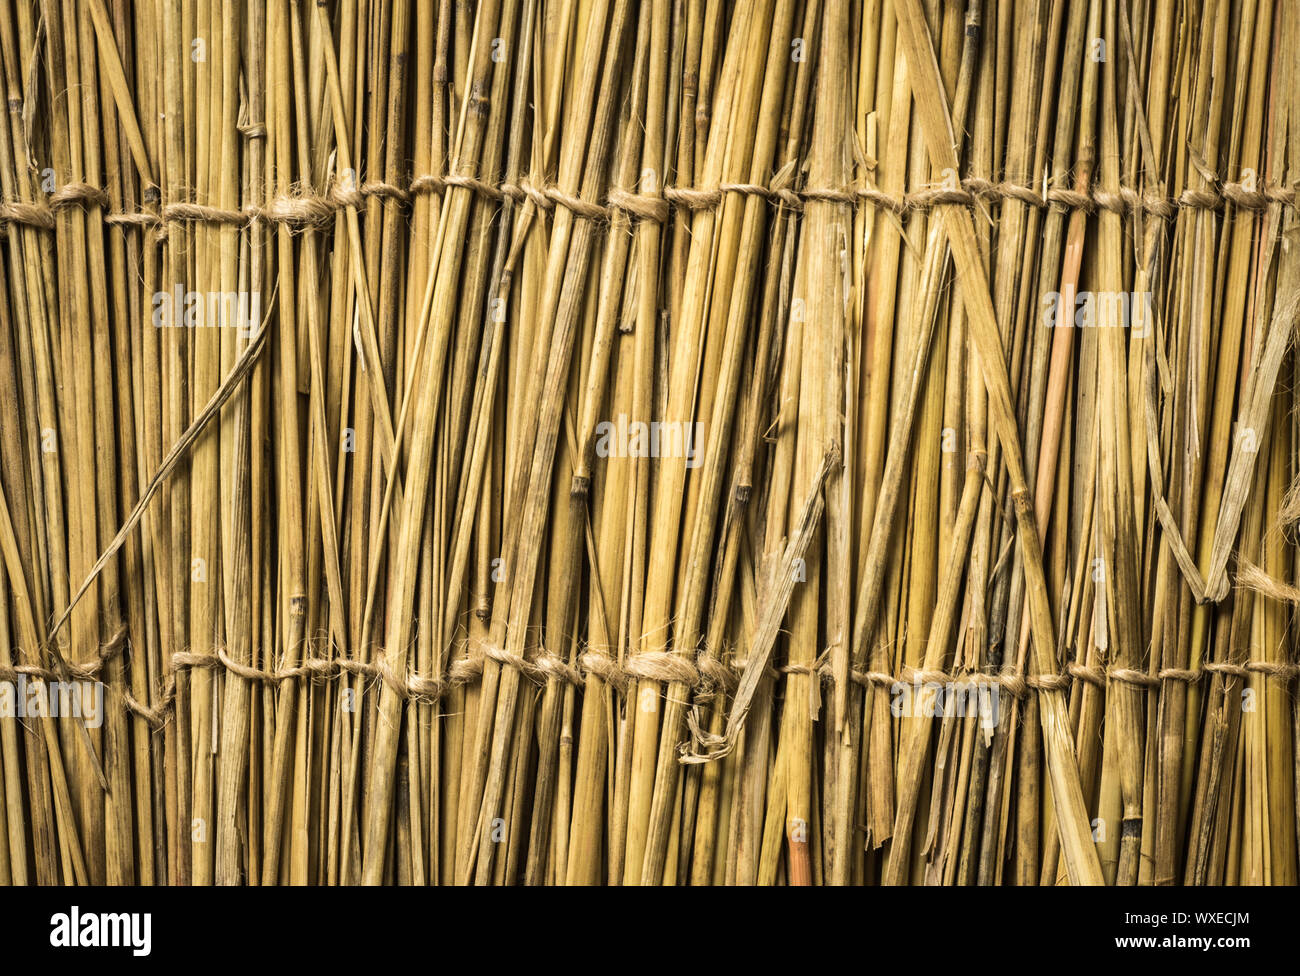 Highly detailed bamboo background. Perfect natural texture. Stock Photo